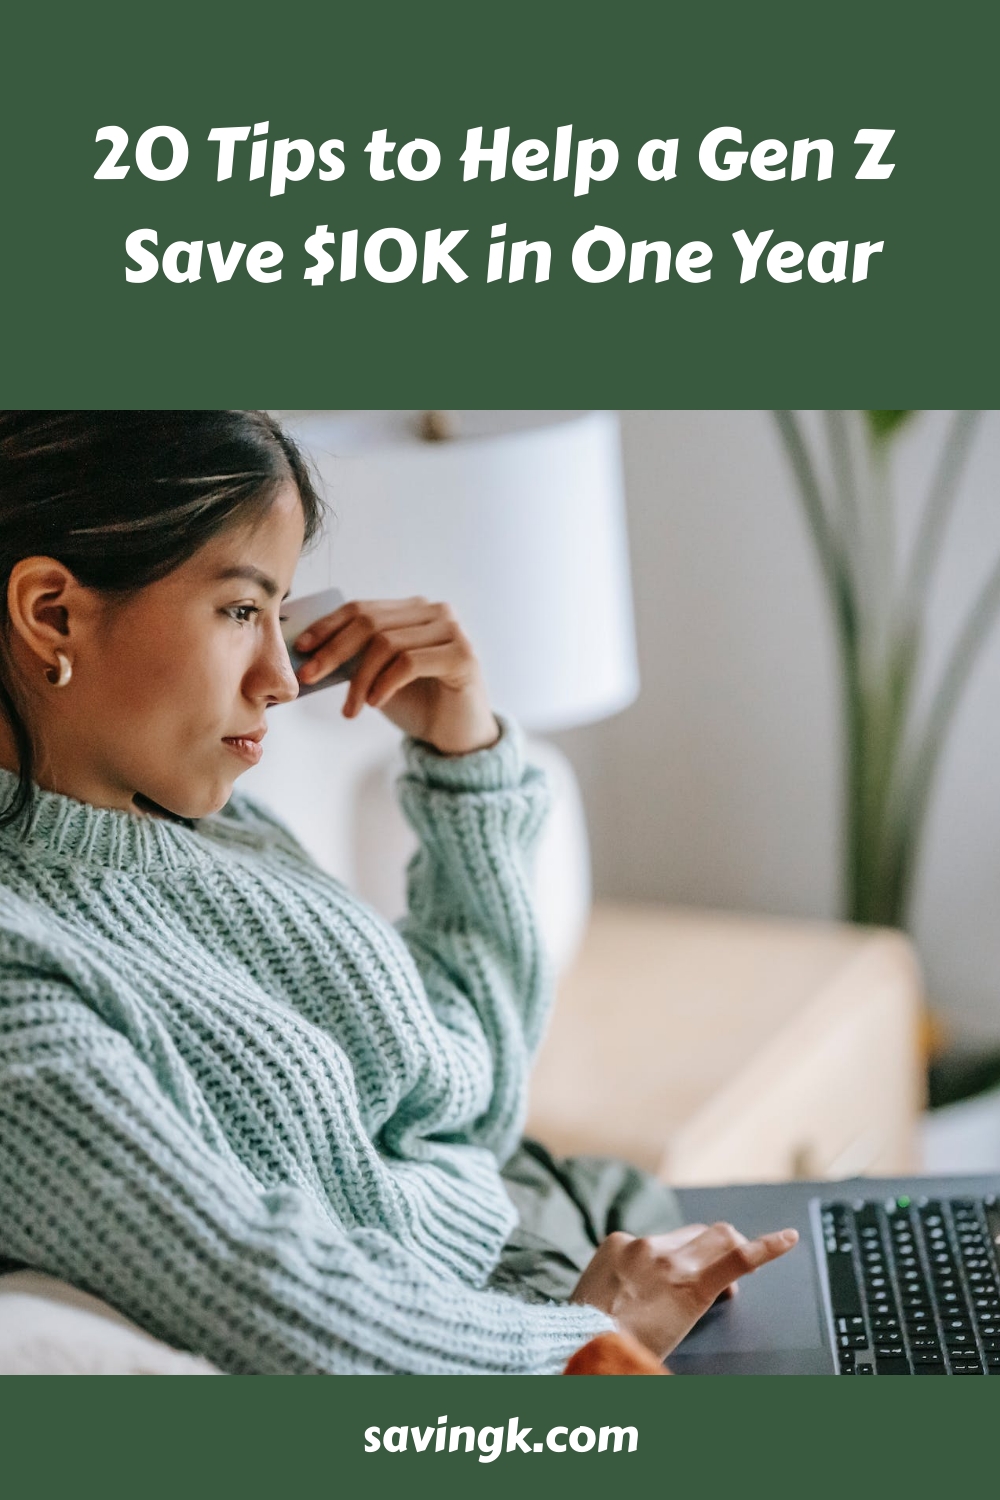 These Tips Can Help a Gen Z Save $10K in One Year